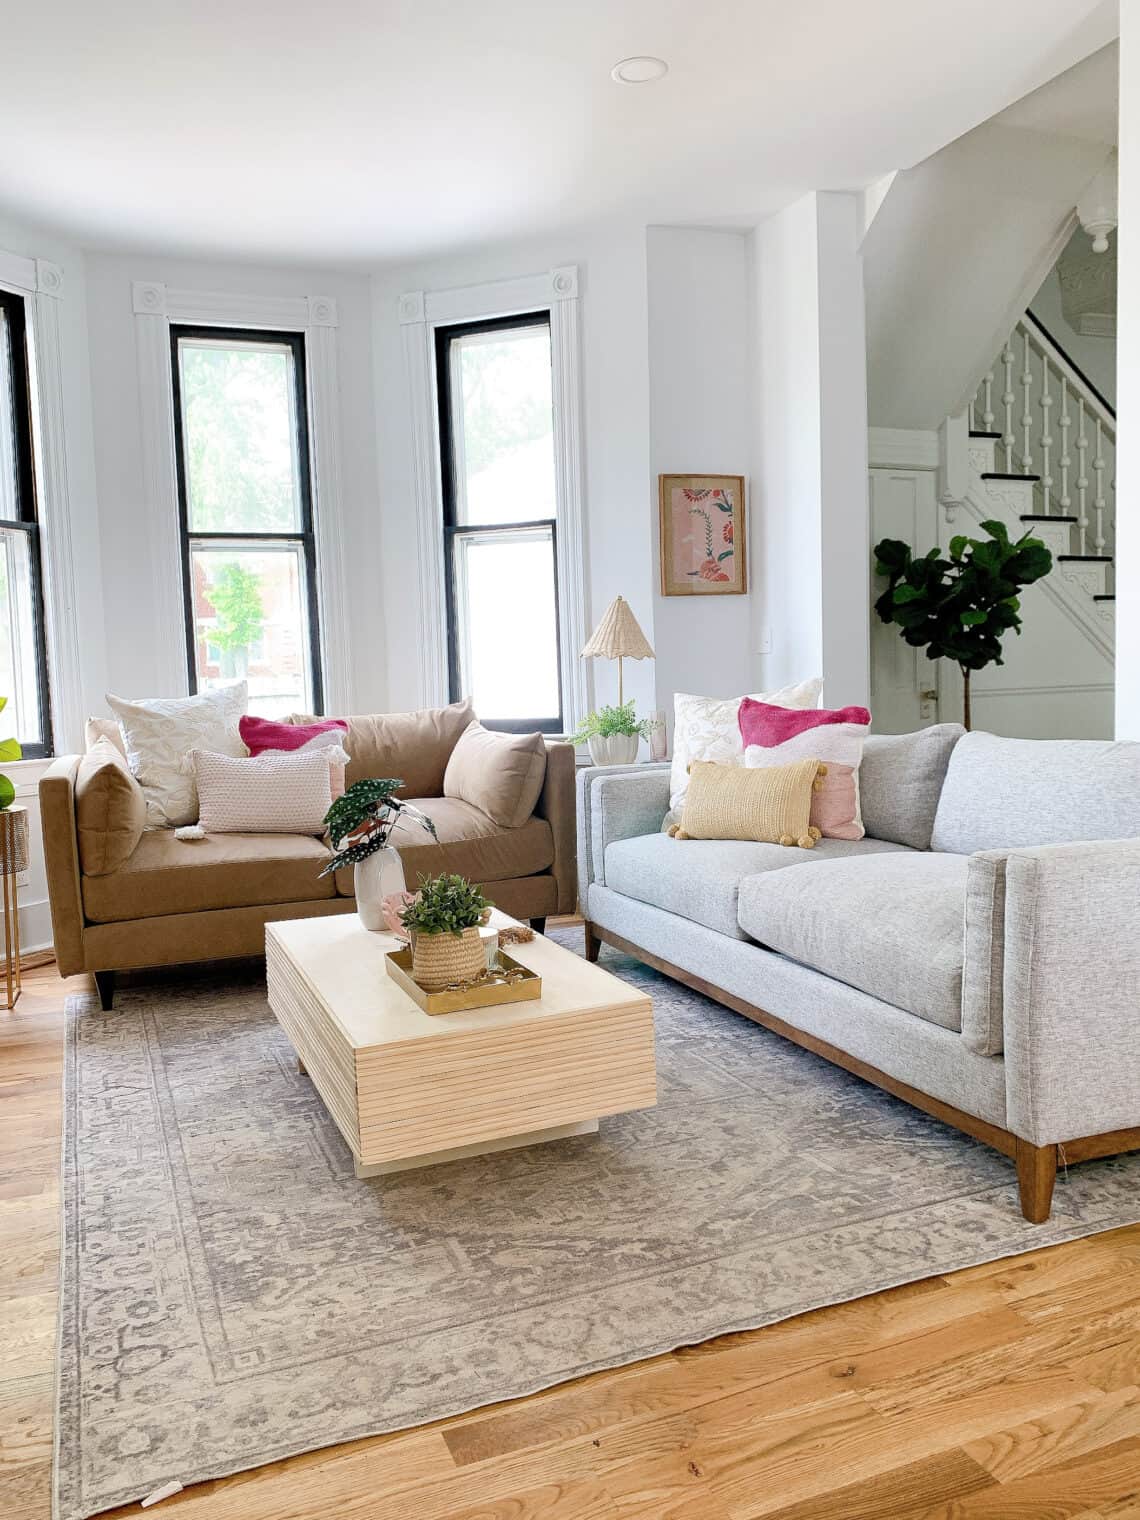 Cozy Family Room with Jonathan Louis Furniture - arinsolangeathome